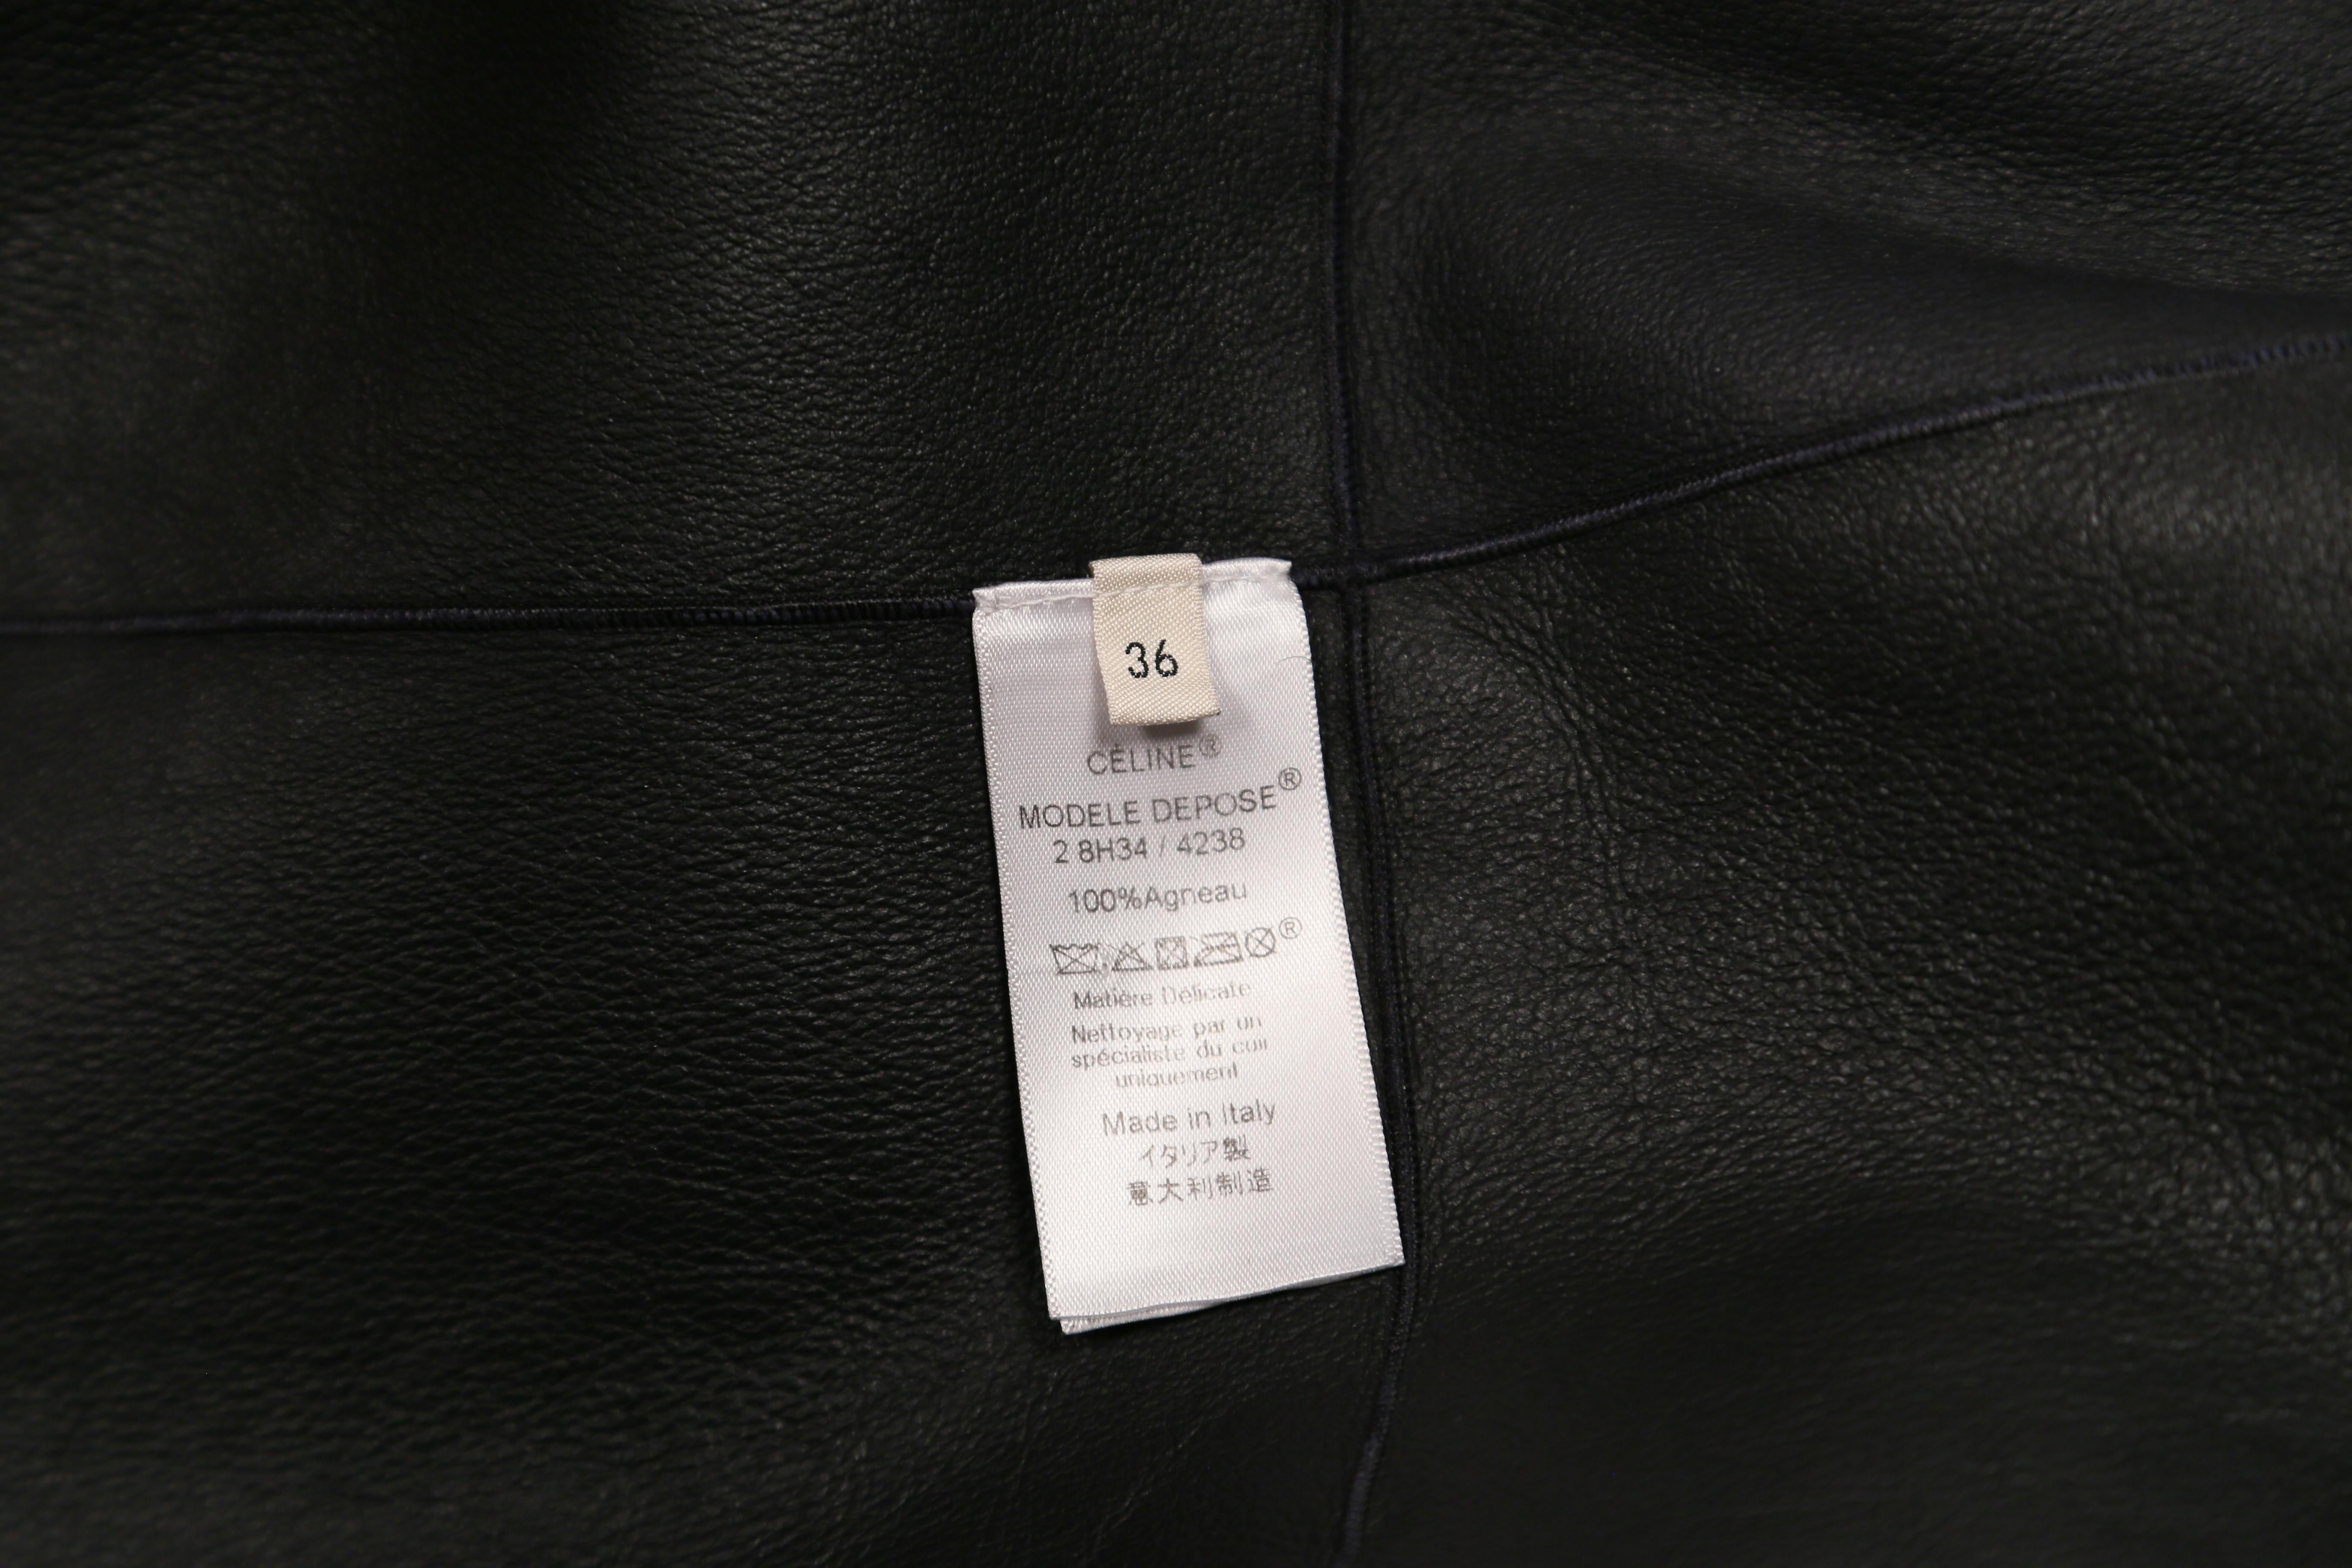 CELINE by PHOEBE PHILO navy blue shearling coat In Good Condition In San Fransisco, CA